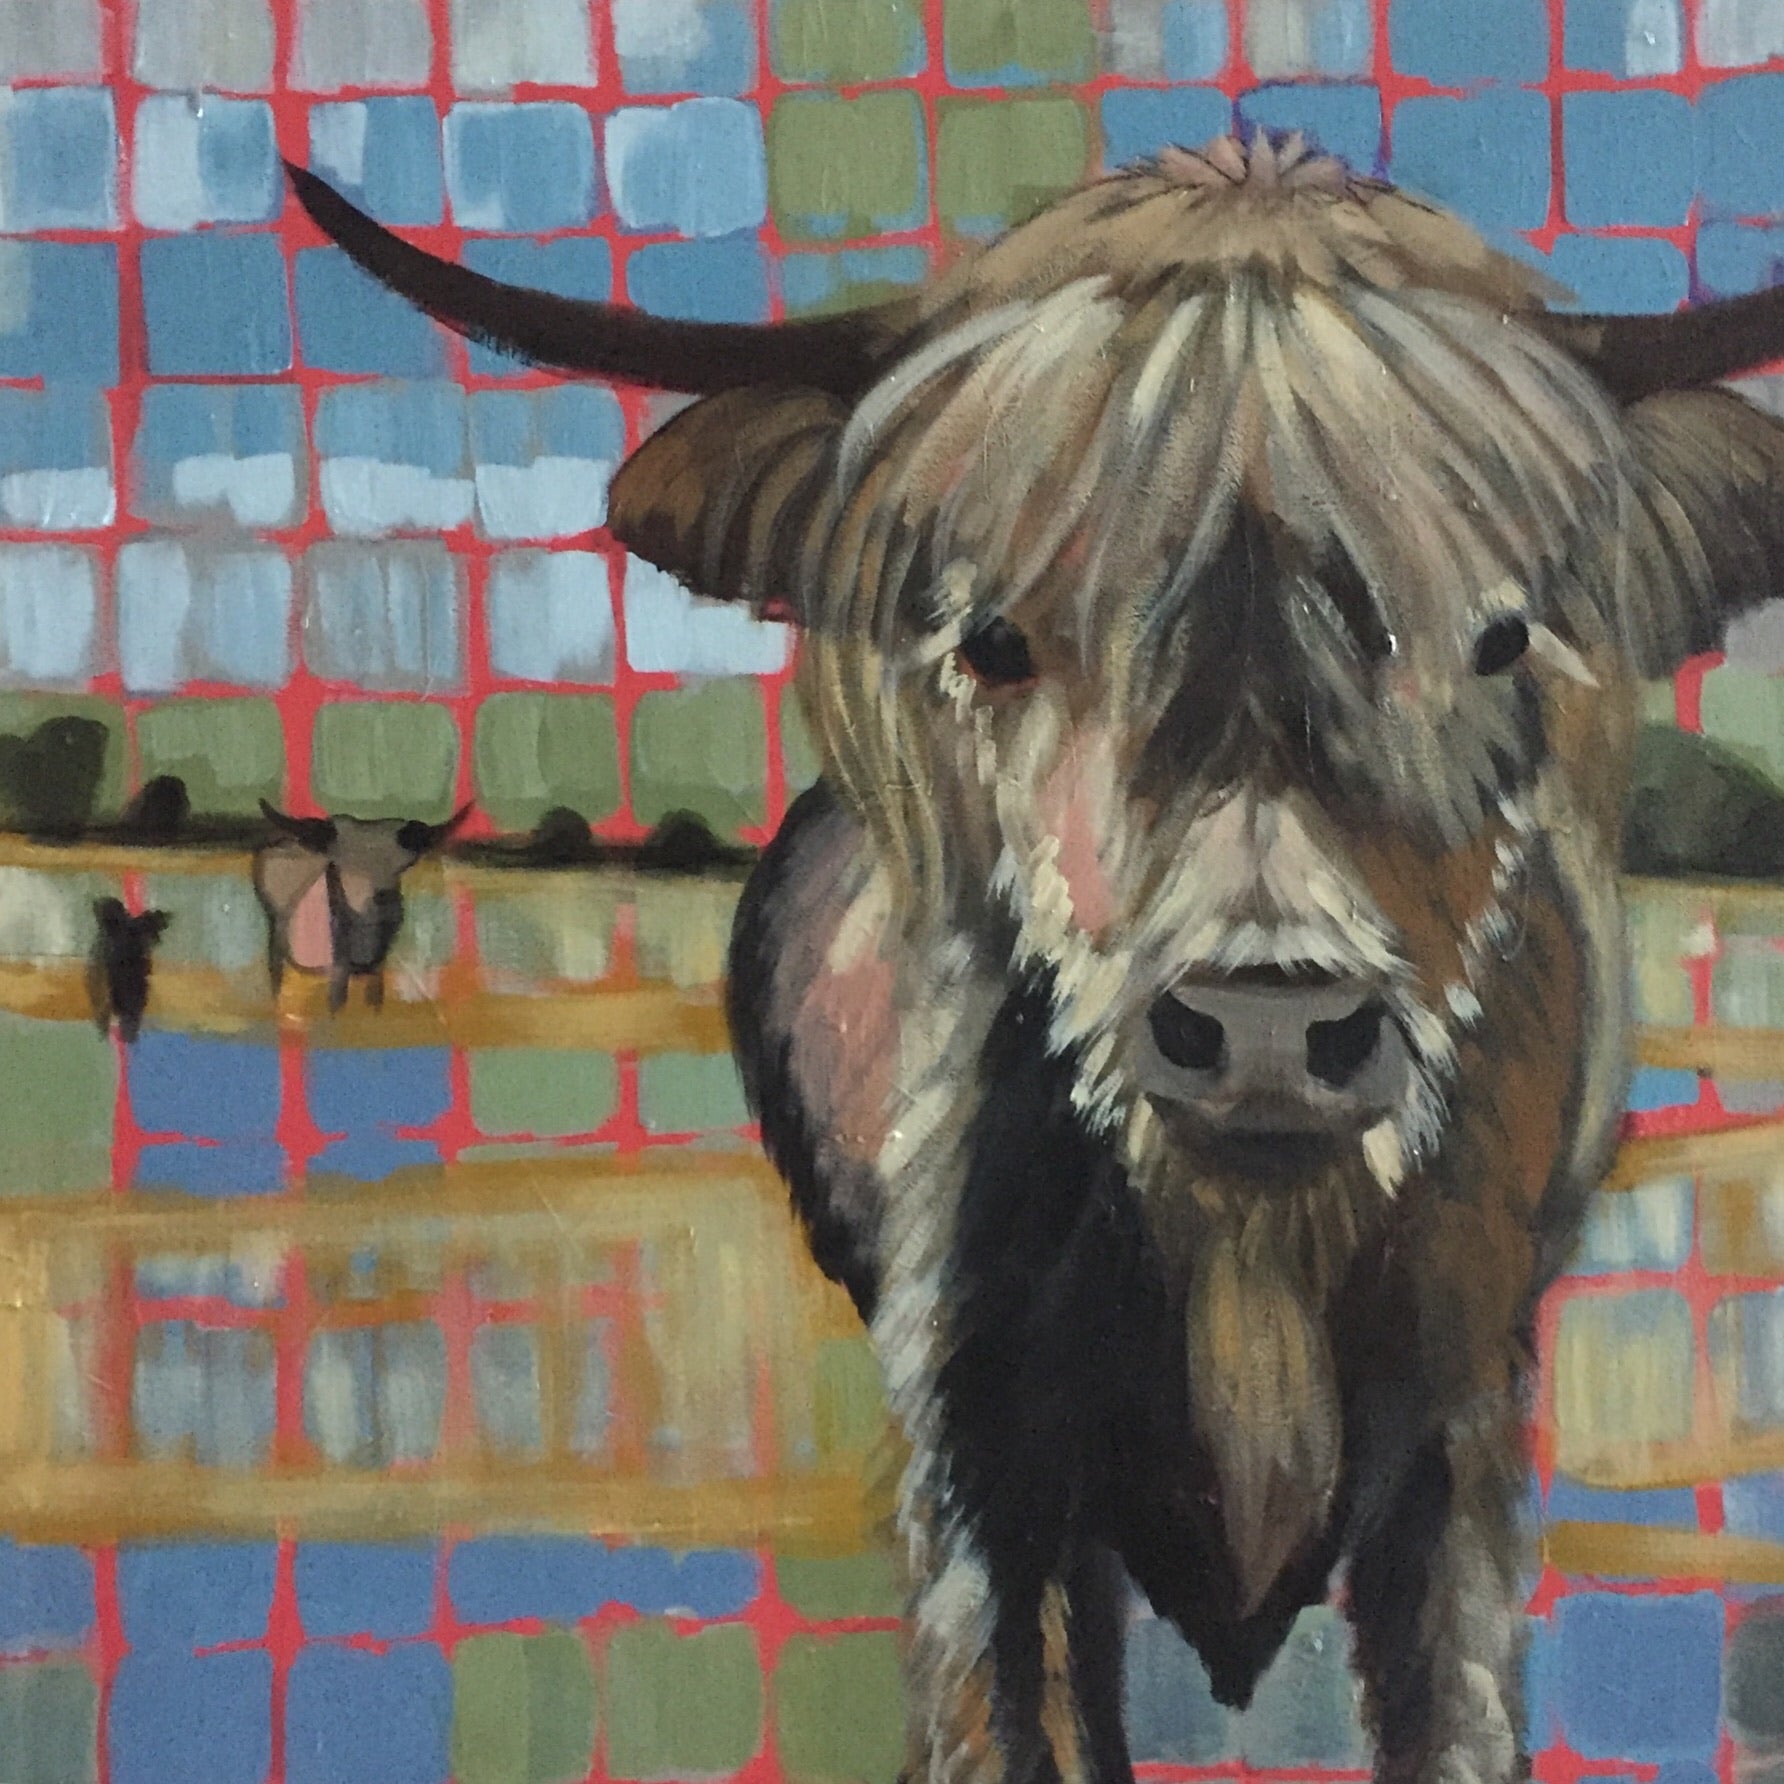 Painting of Scottish Highland cow named Georgia Peach.  Red background with abstract Guthrie clan tartan colors of blue and green.  Cow is in lower right foreground.